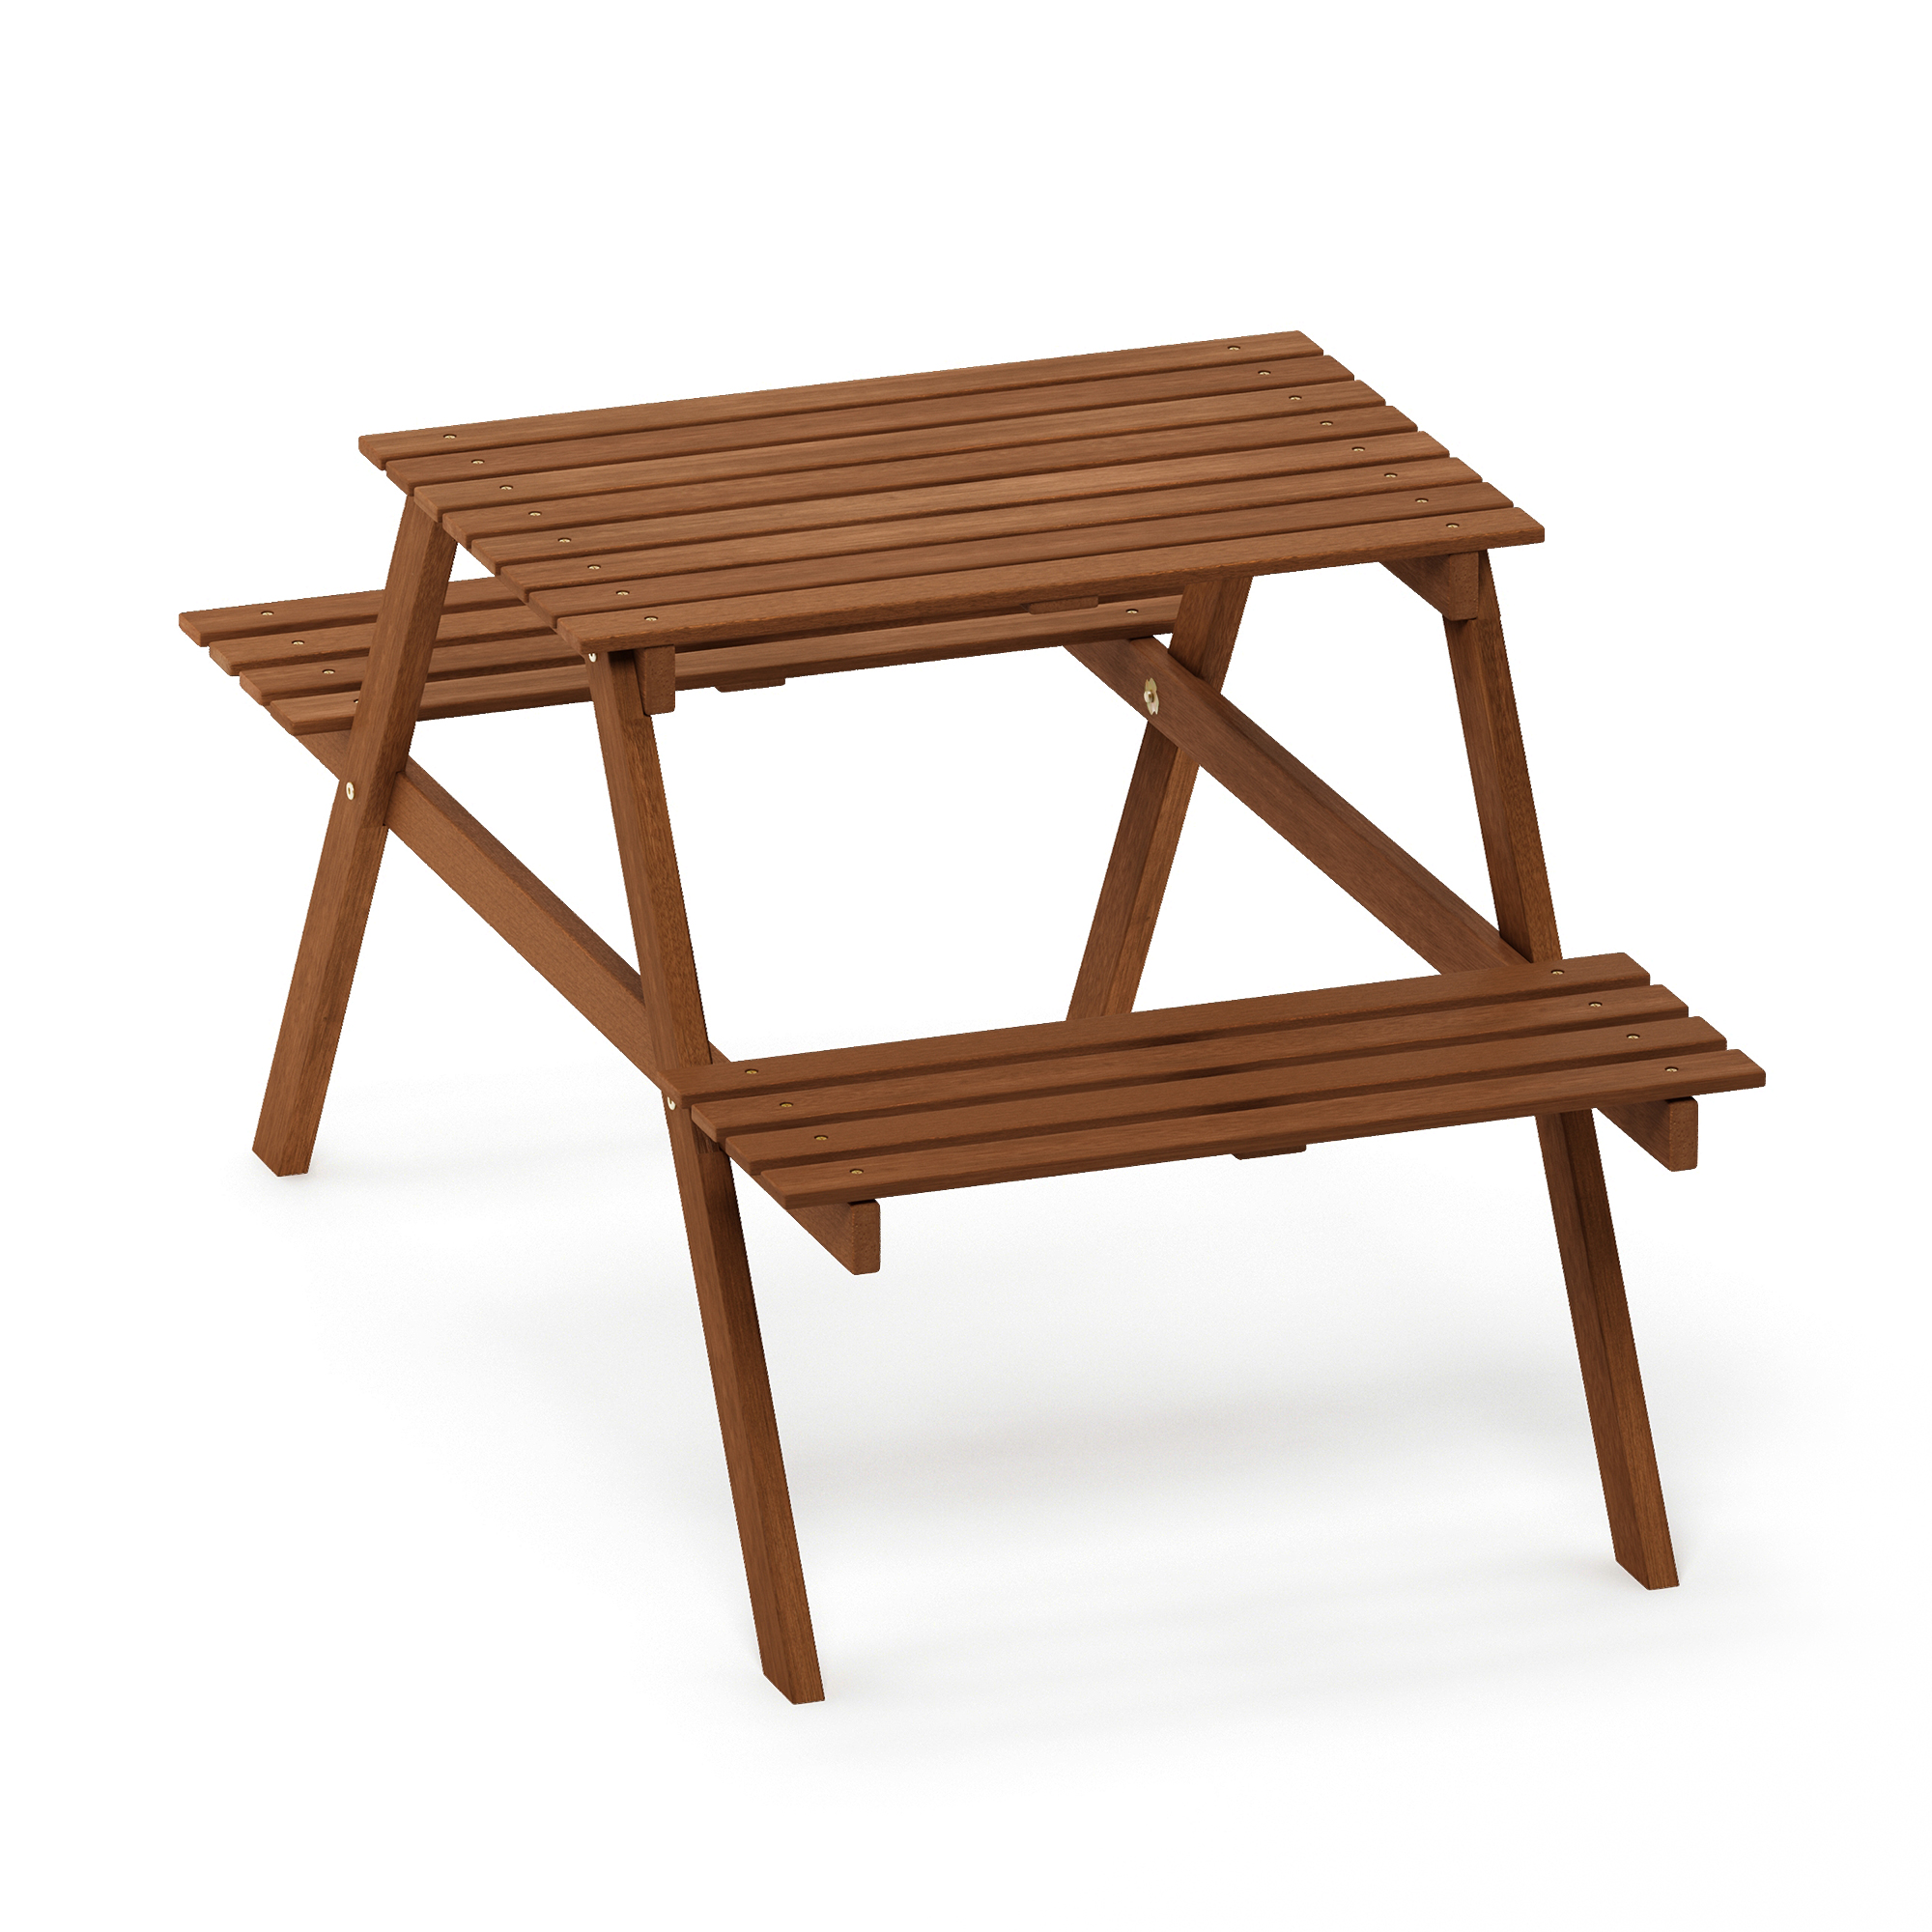 Furinno Tioman Hardwood Kids Picnic Table and Chair Set in Teak Oil - image 4 of 6